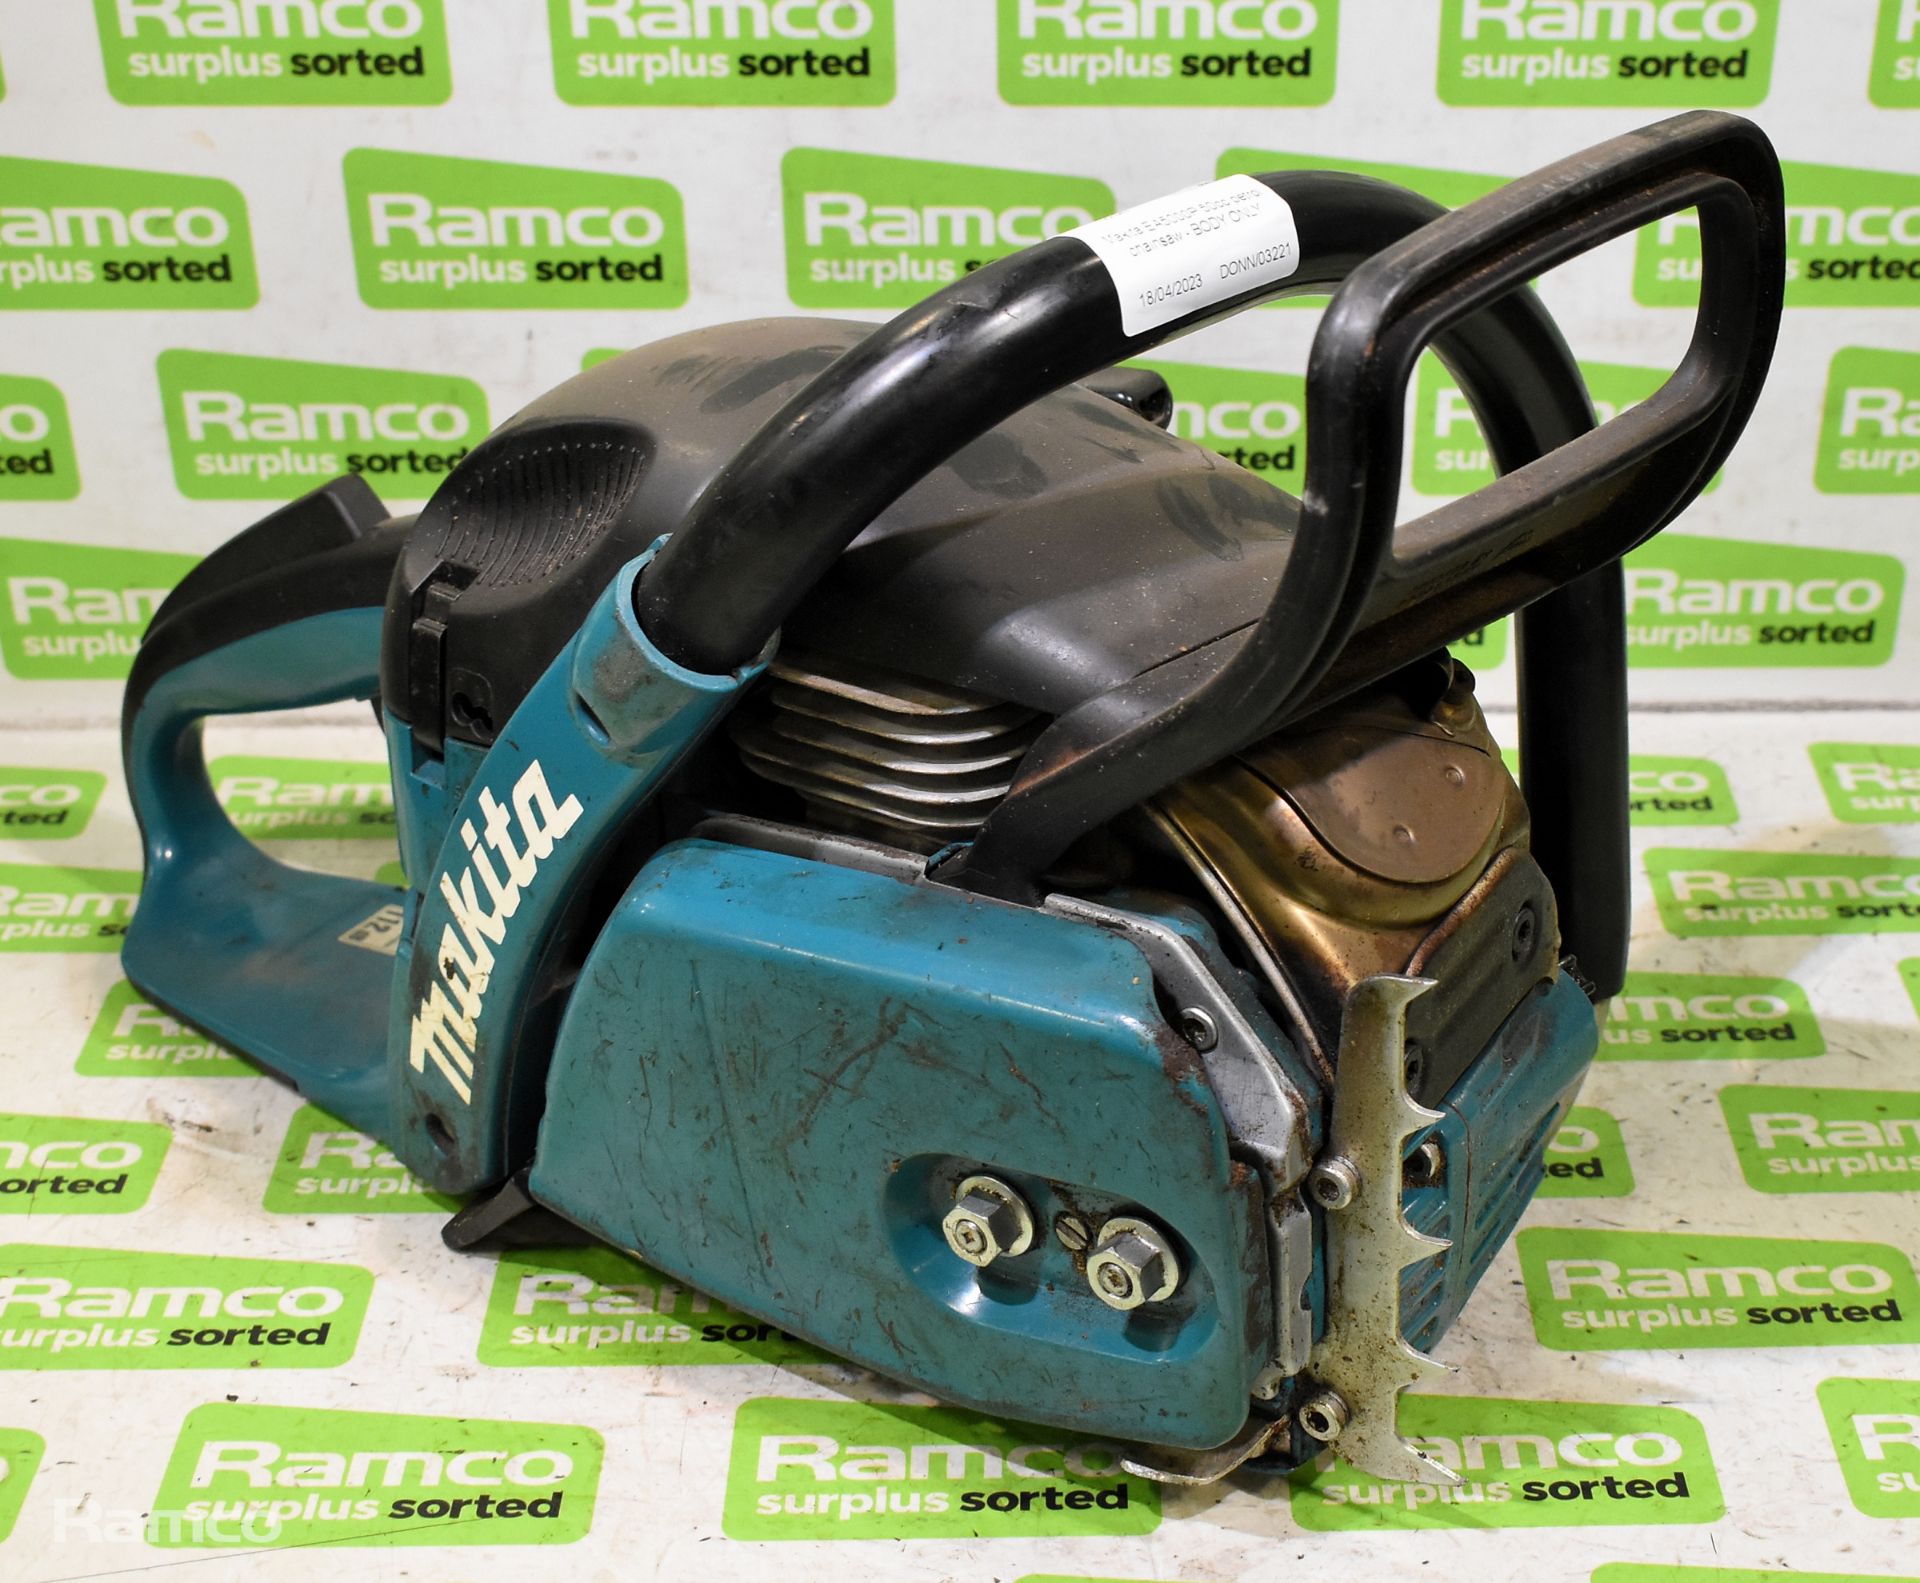 3x Makita DCS5030 50cc petrol chainsaw - BODIES ONLY - AS SPARES AND REPAIRS, 1x Makita EA5000P - Image 14 of 22